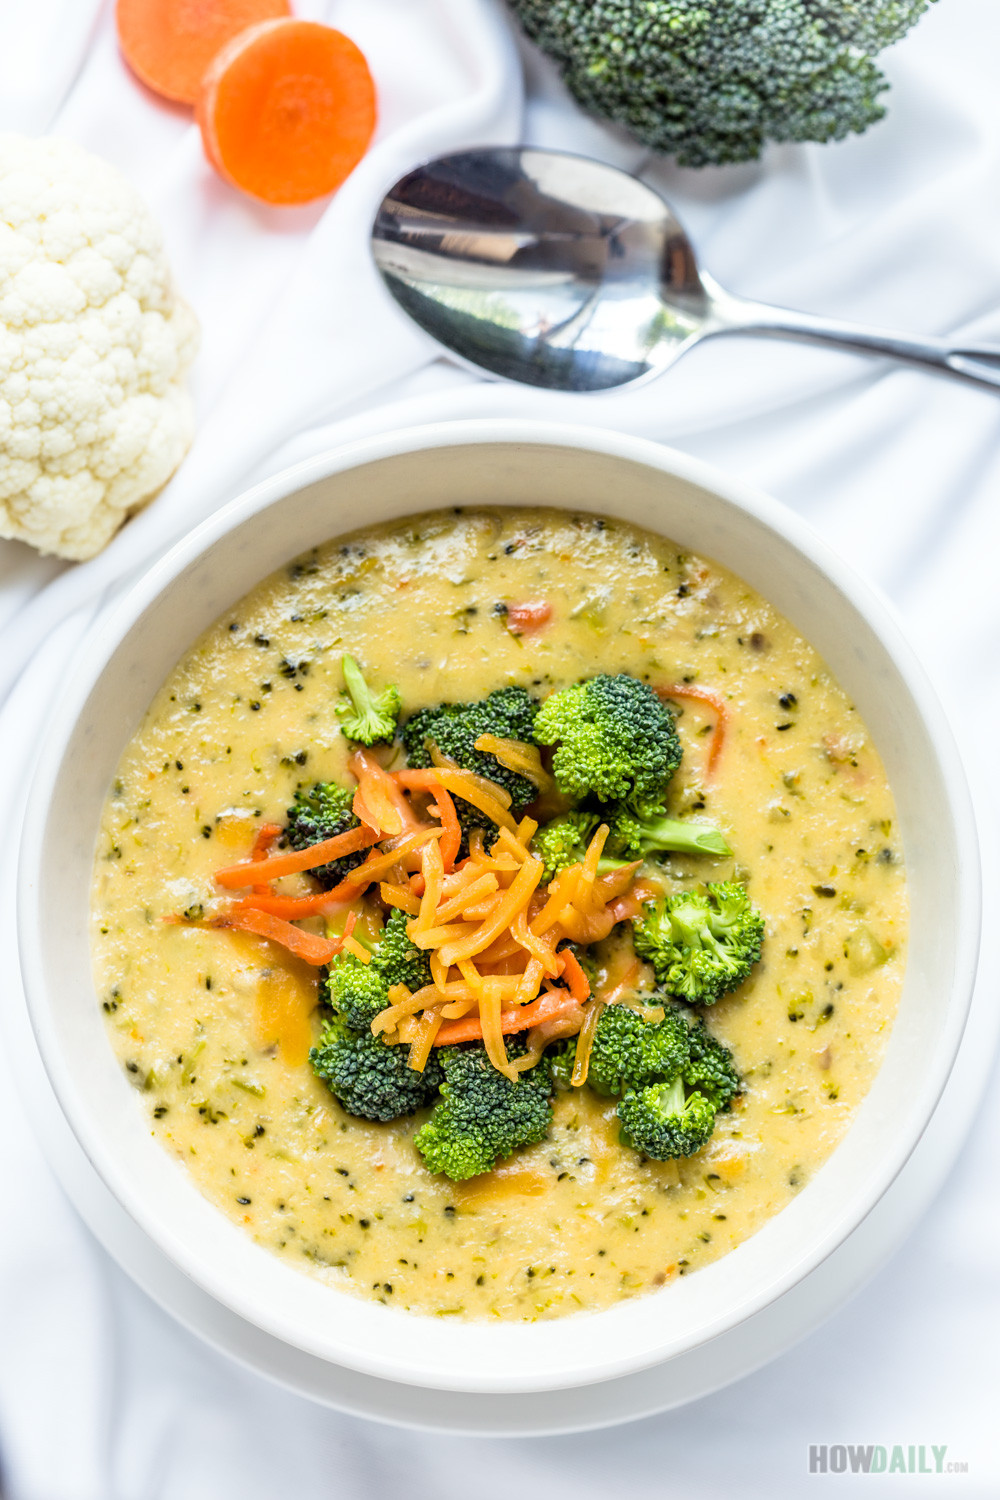 Low Carb Broccoli Cheddar Soup
 Low Carb Broccoli Cheese Soup Recipe Healthy Diet with